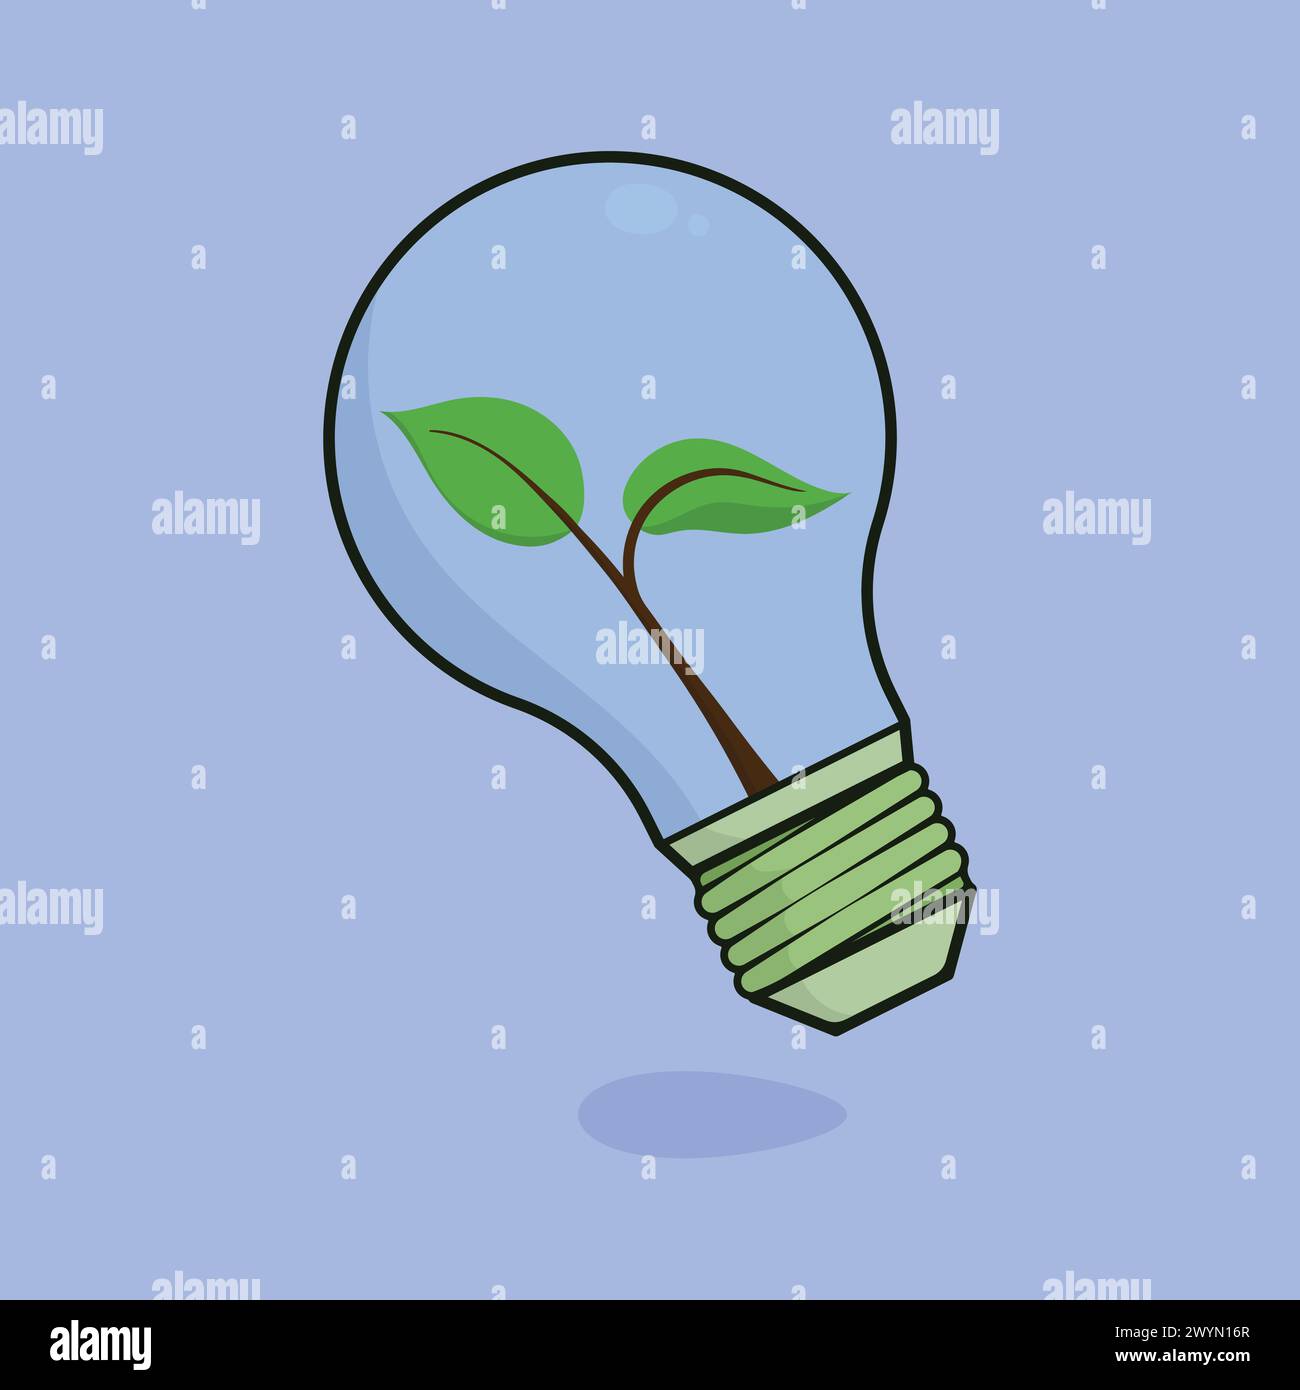 Happy Earth Day Card Vector Illustration Earth Day Poster Vector Concept April 22 Save Earth Vector Global Warming Stock Vector